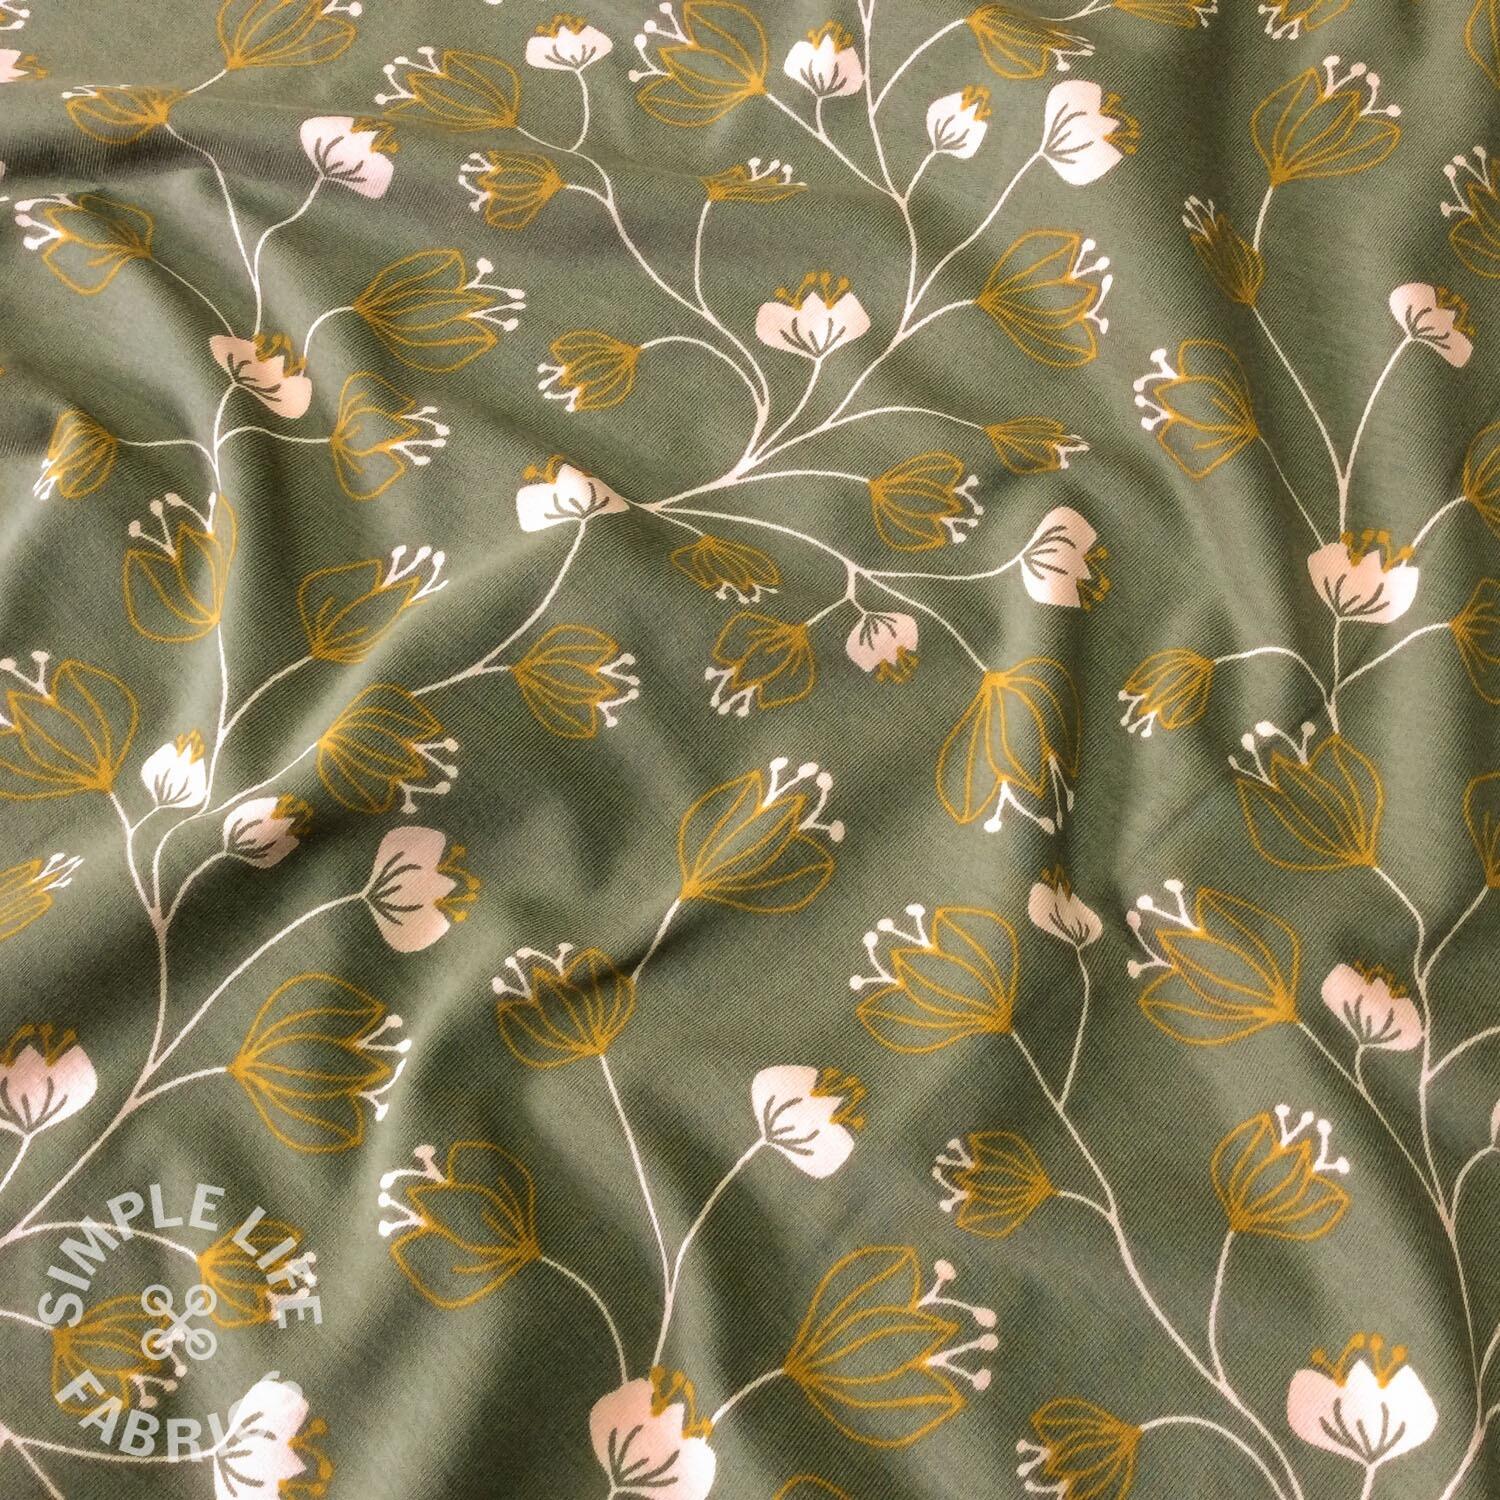 Trailing green and pink floral jersey fabric by poppy europe